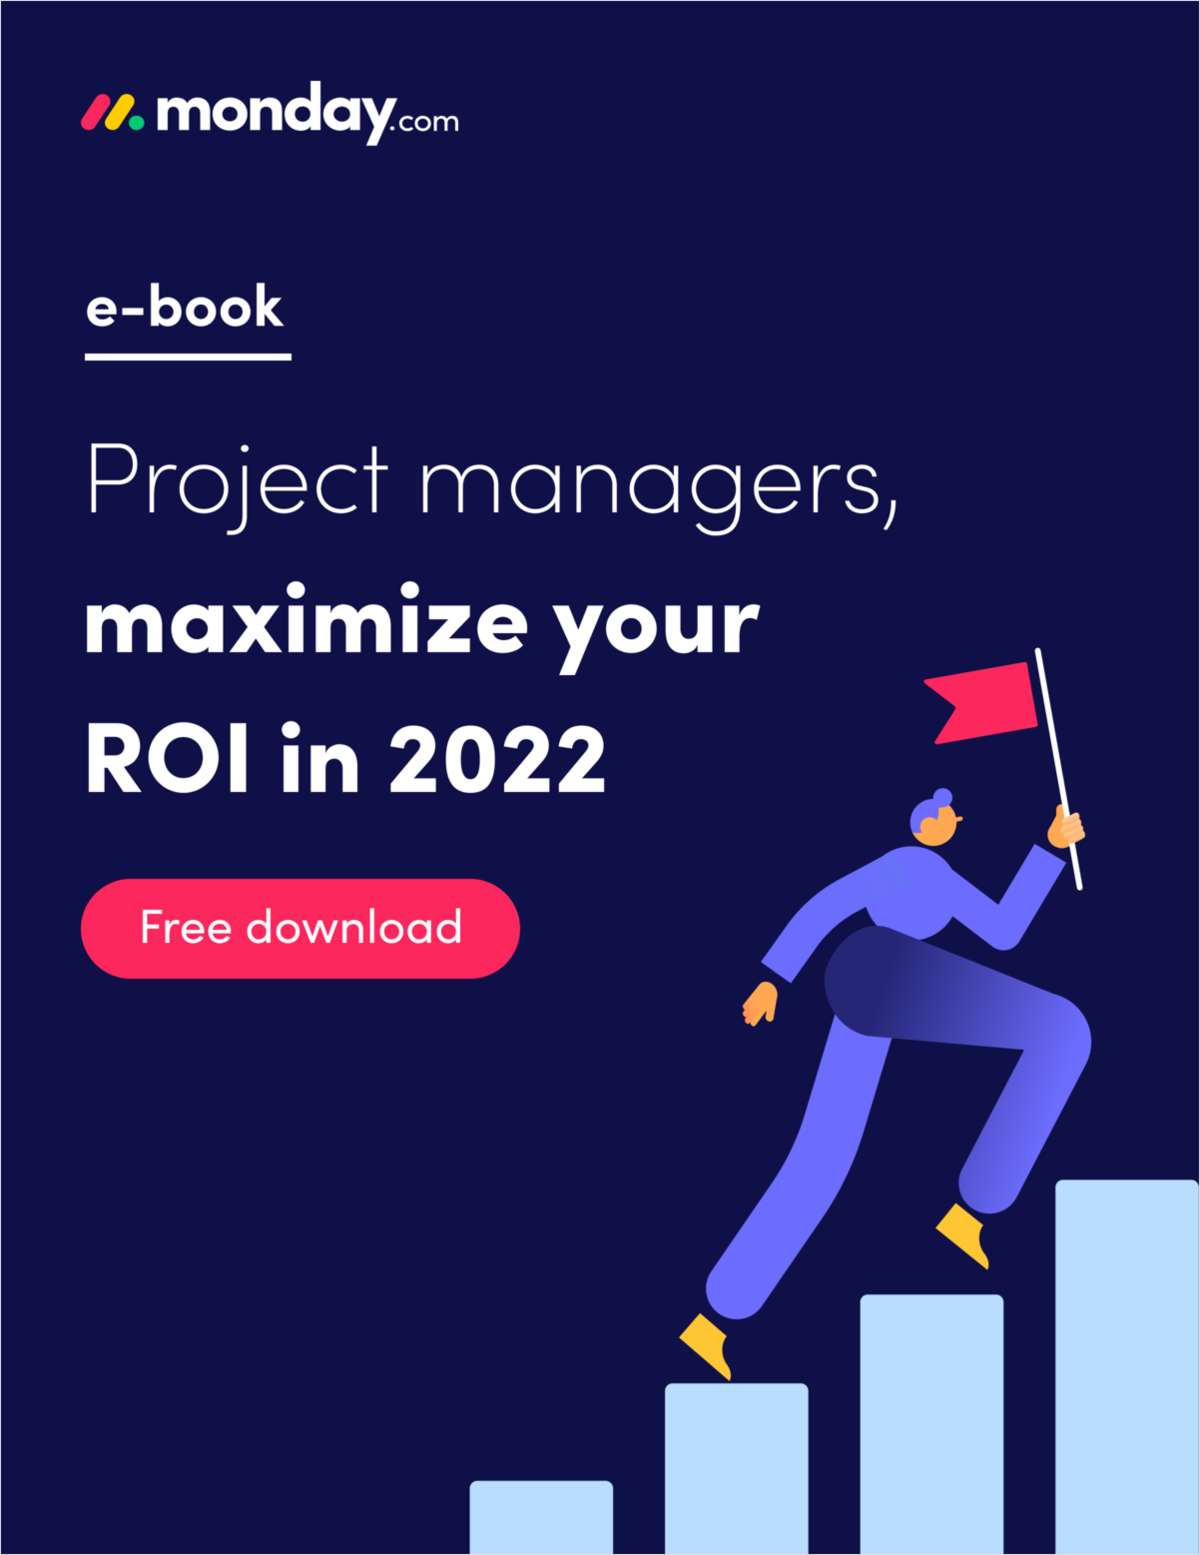 How to maximize the ROI of your next project